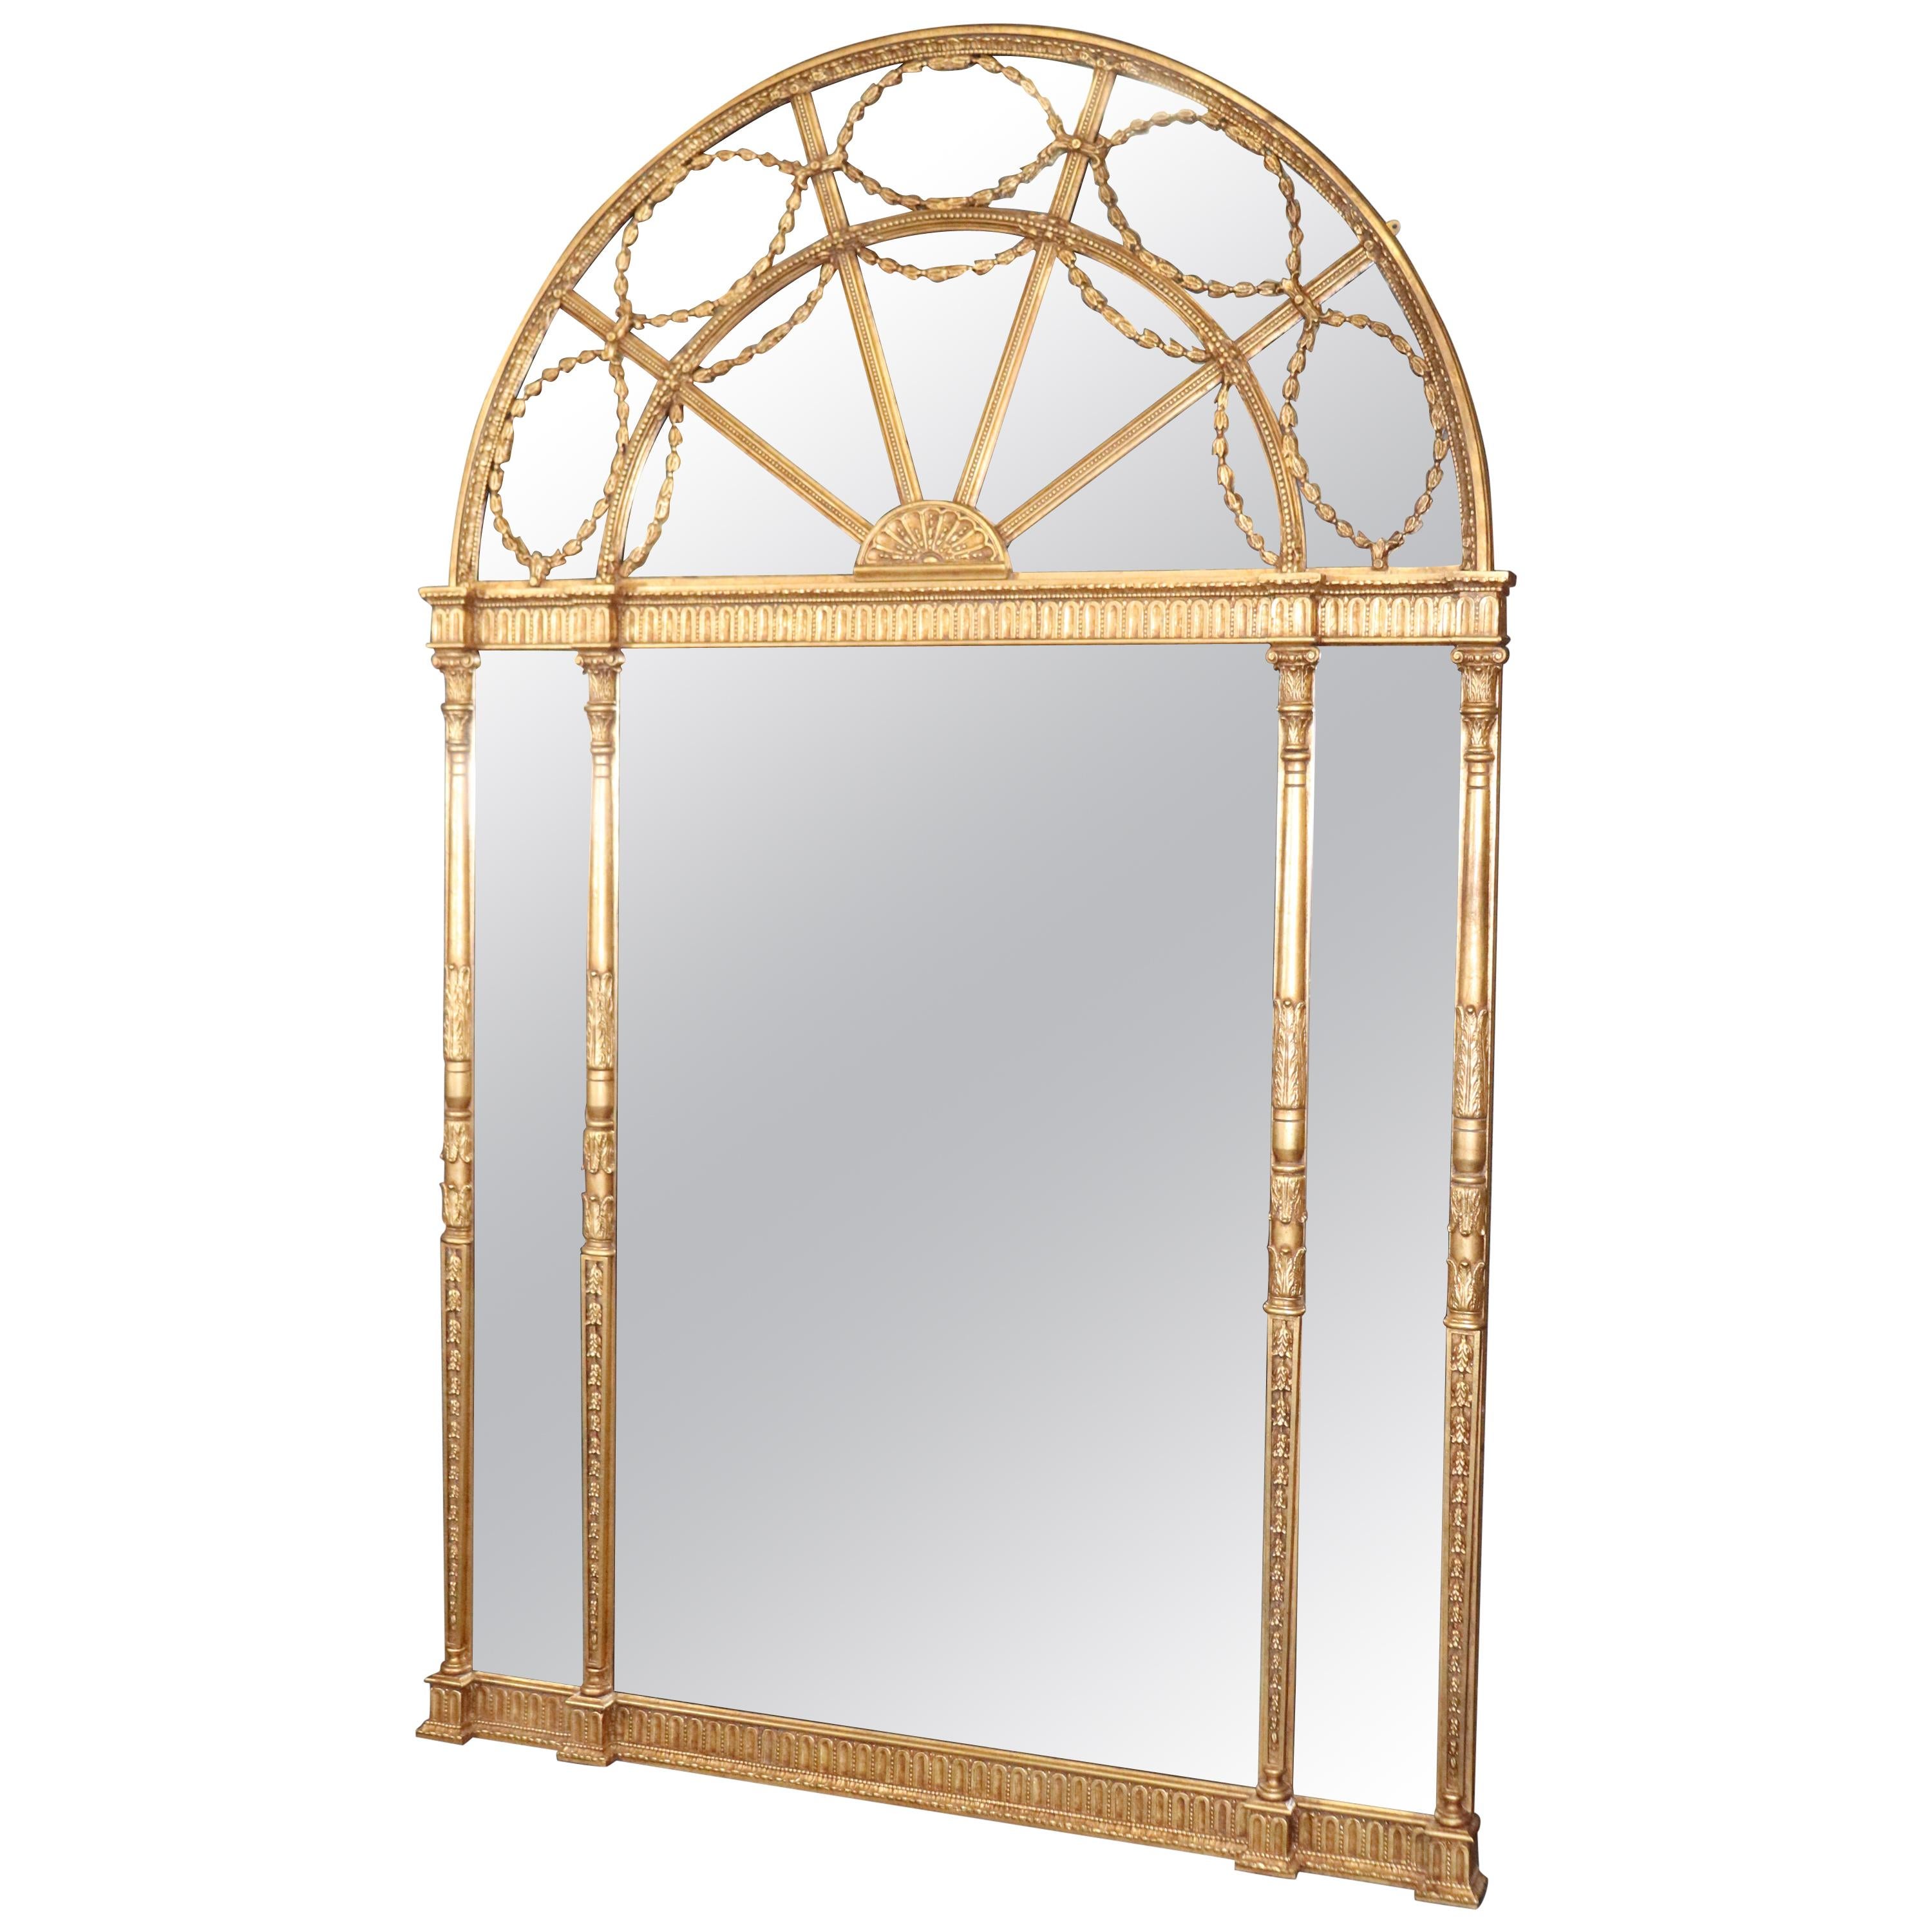 Monumental Gilded Arched Decorative Arts Neoclassical Wall Mantle Mantel Mirror